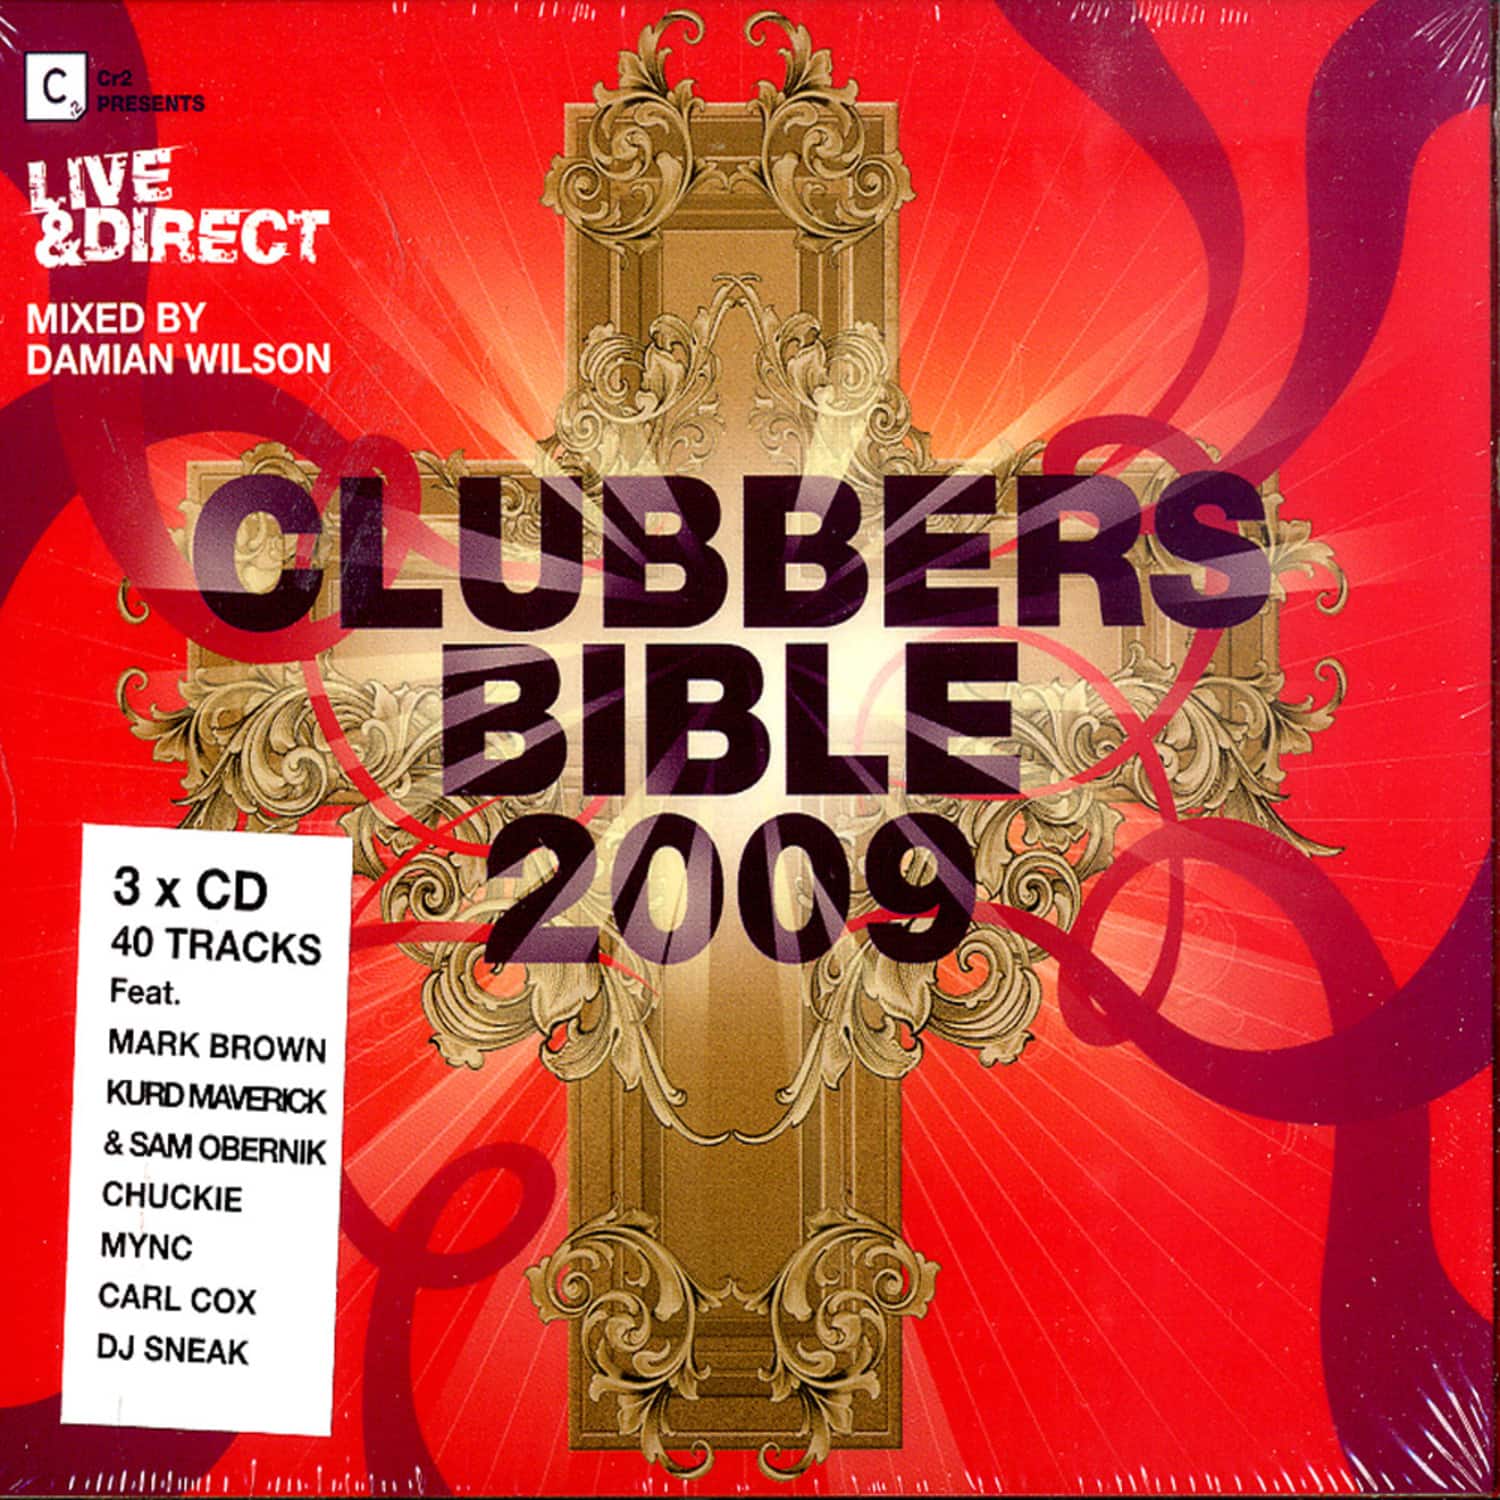 Live & Direct mixed by Damian Wilson - CLUBBERS BIBLE 2009 